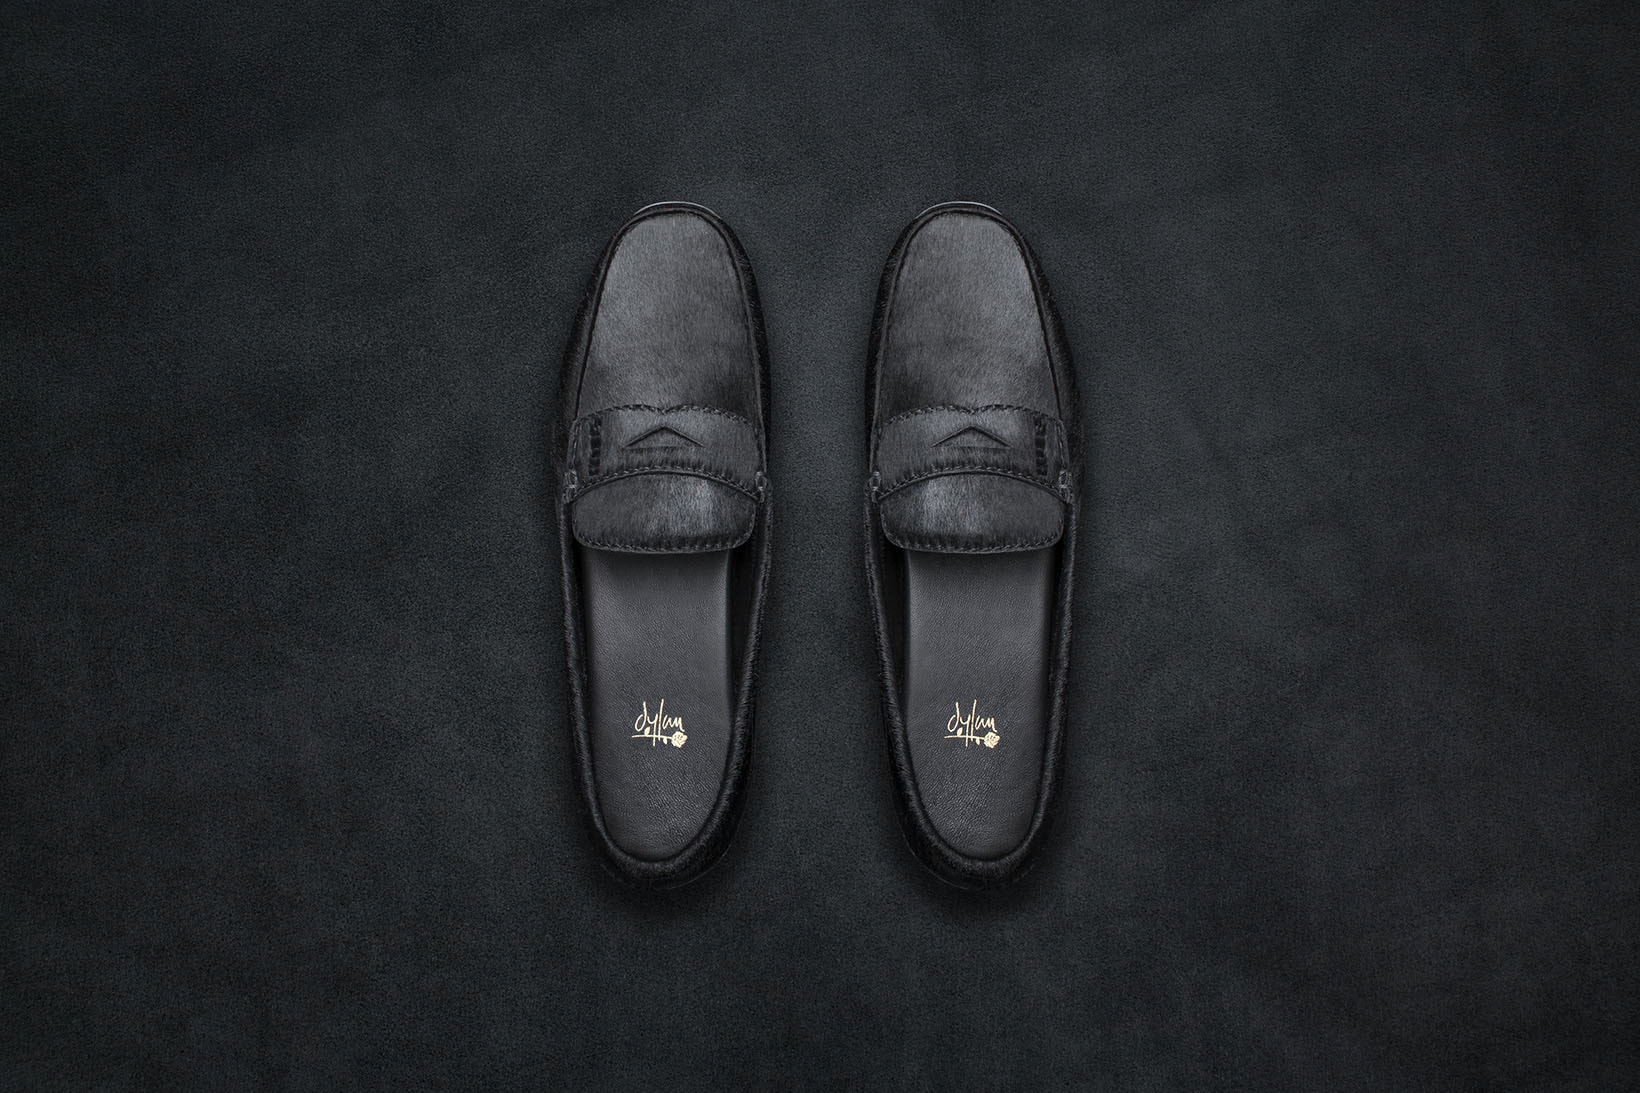 HUF Dylan Rieder Driver Calf Hair may 26 27 29 2018 release date info drop sneakers shoes footwear vibram loafer signature